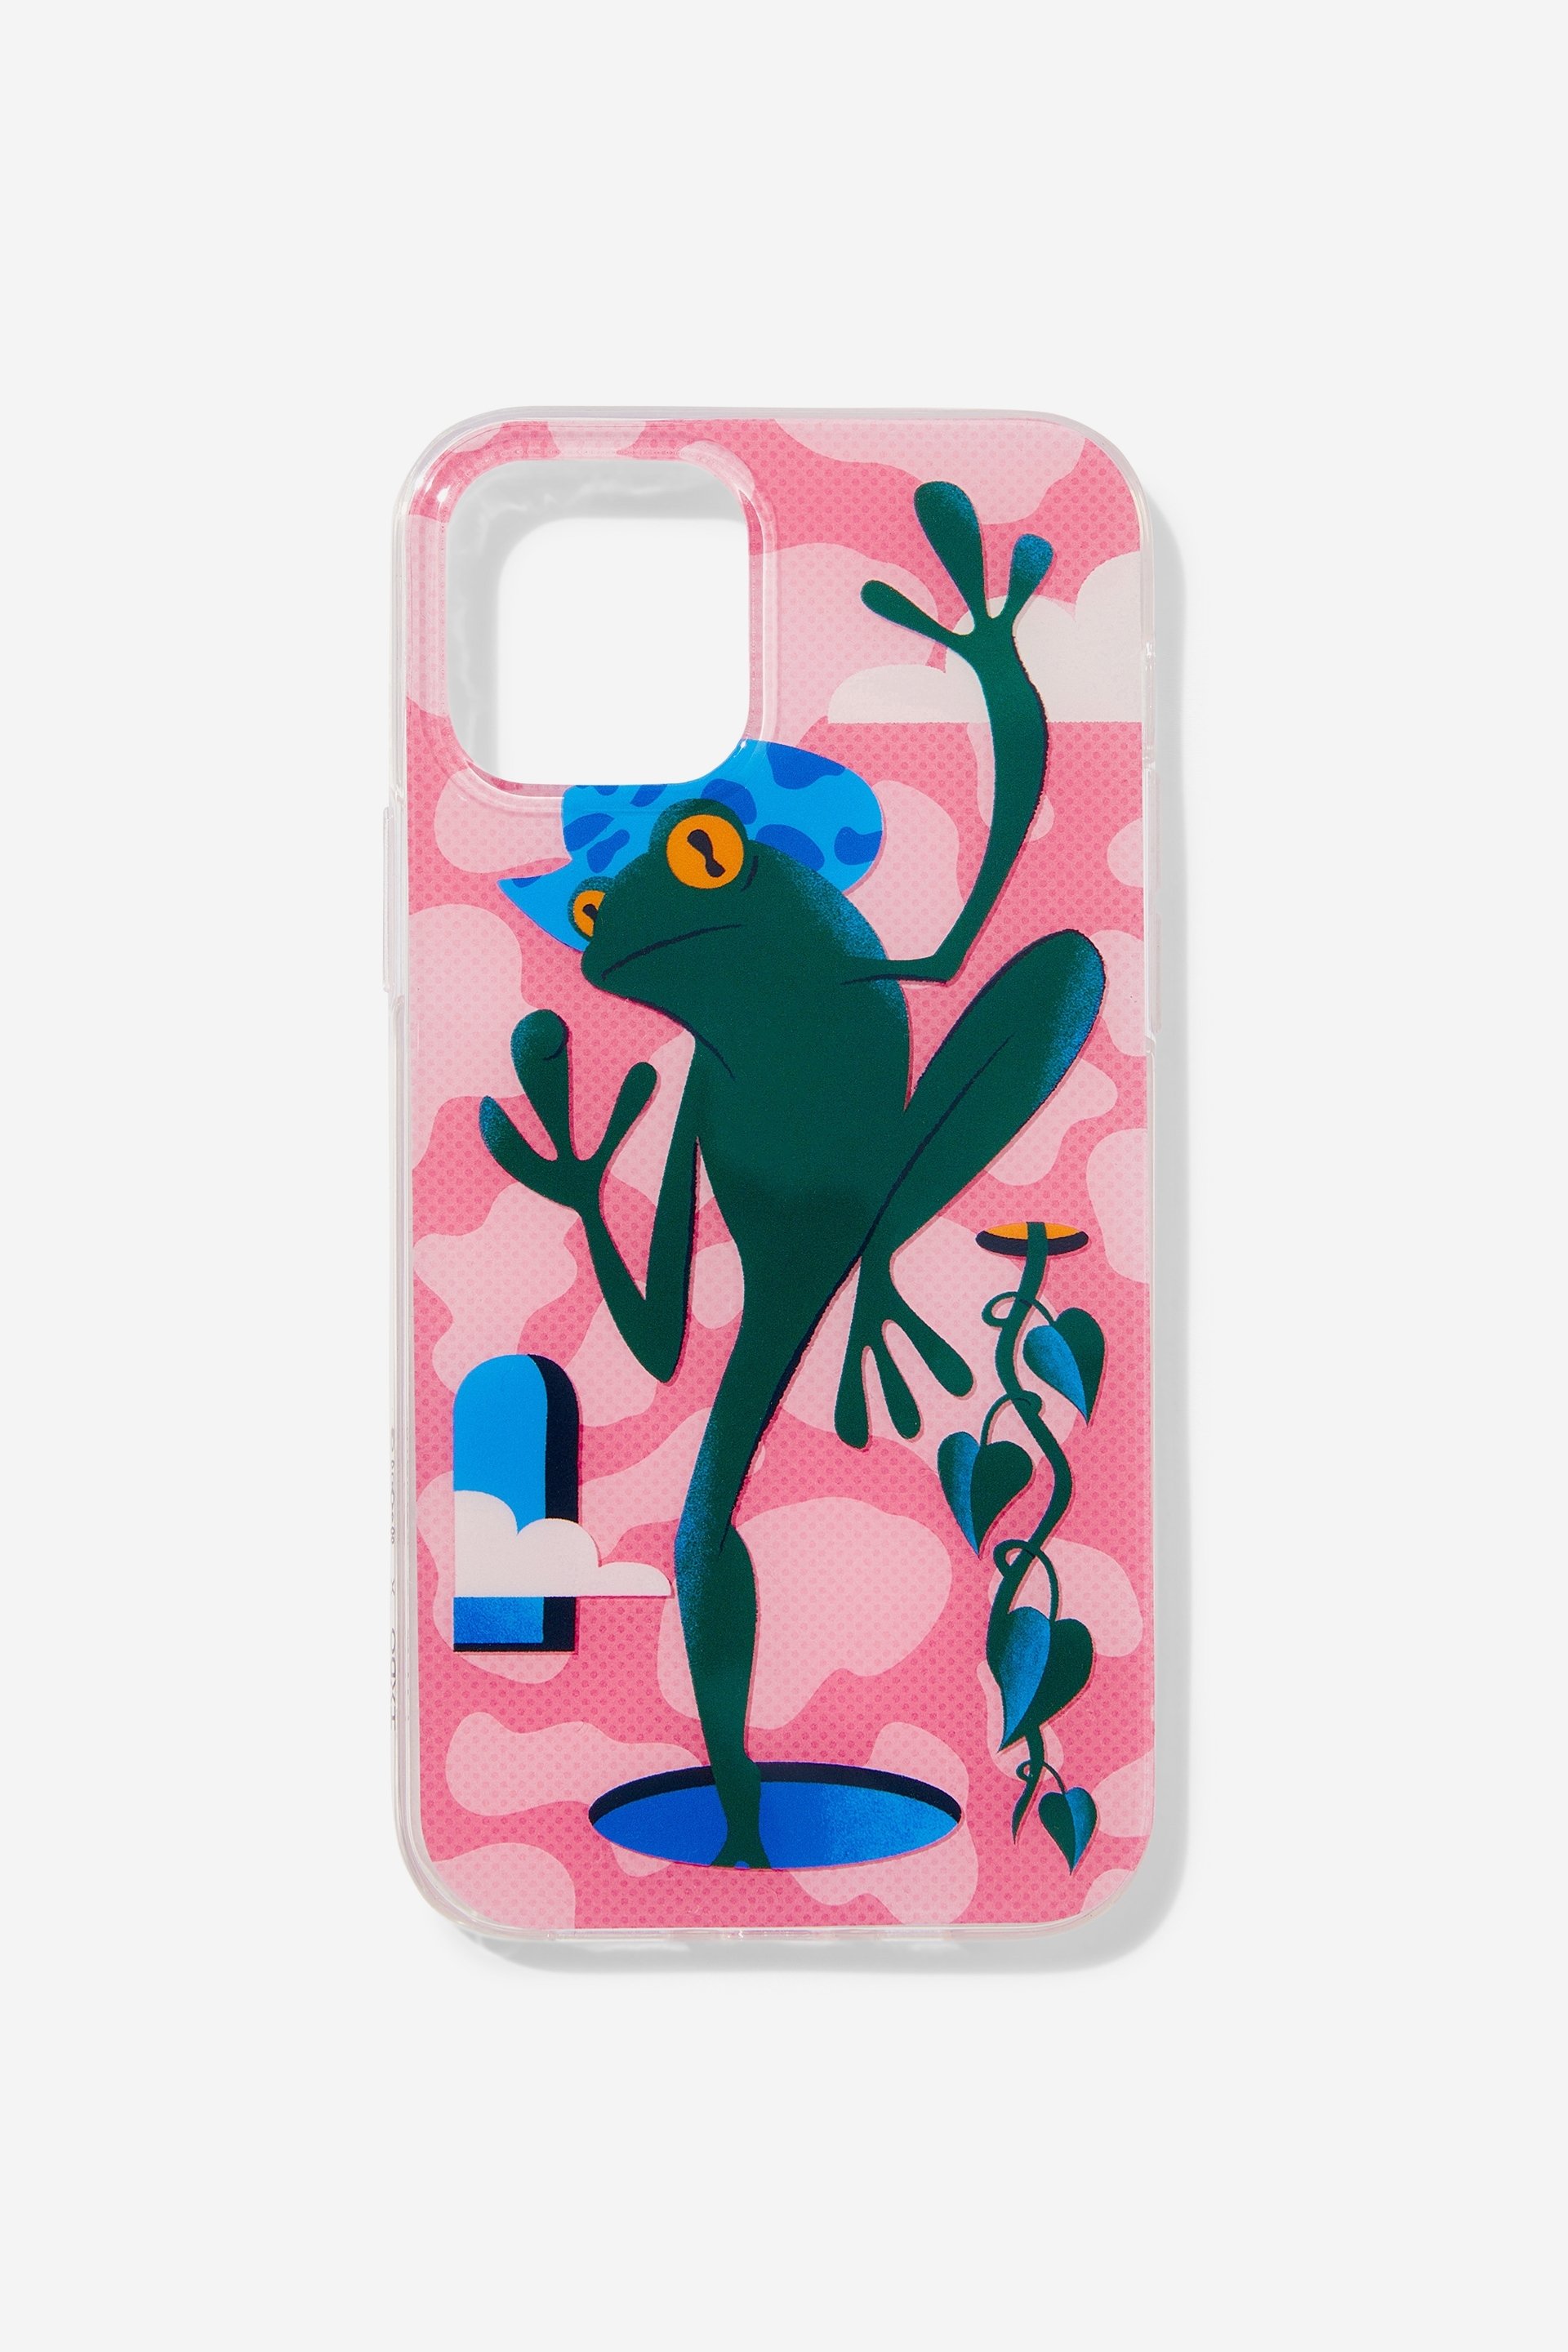 Typo - Graphic Phone Case Iphone 12-12 Pro - Txm frog in a hat